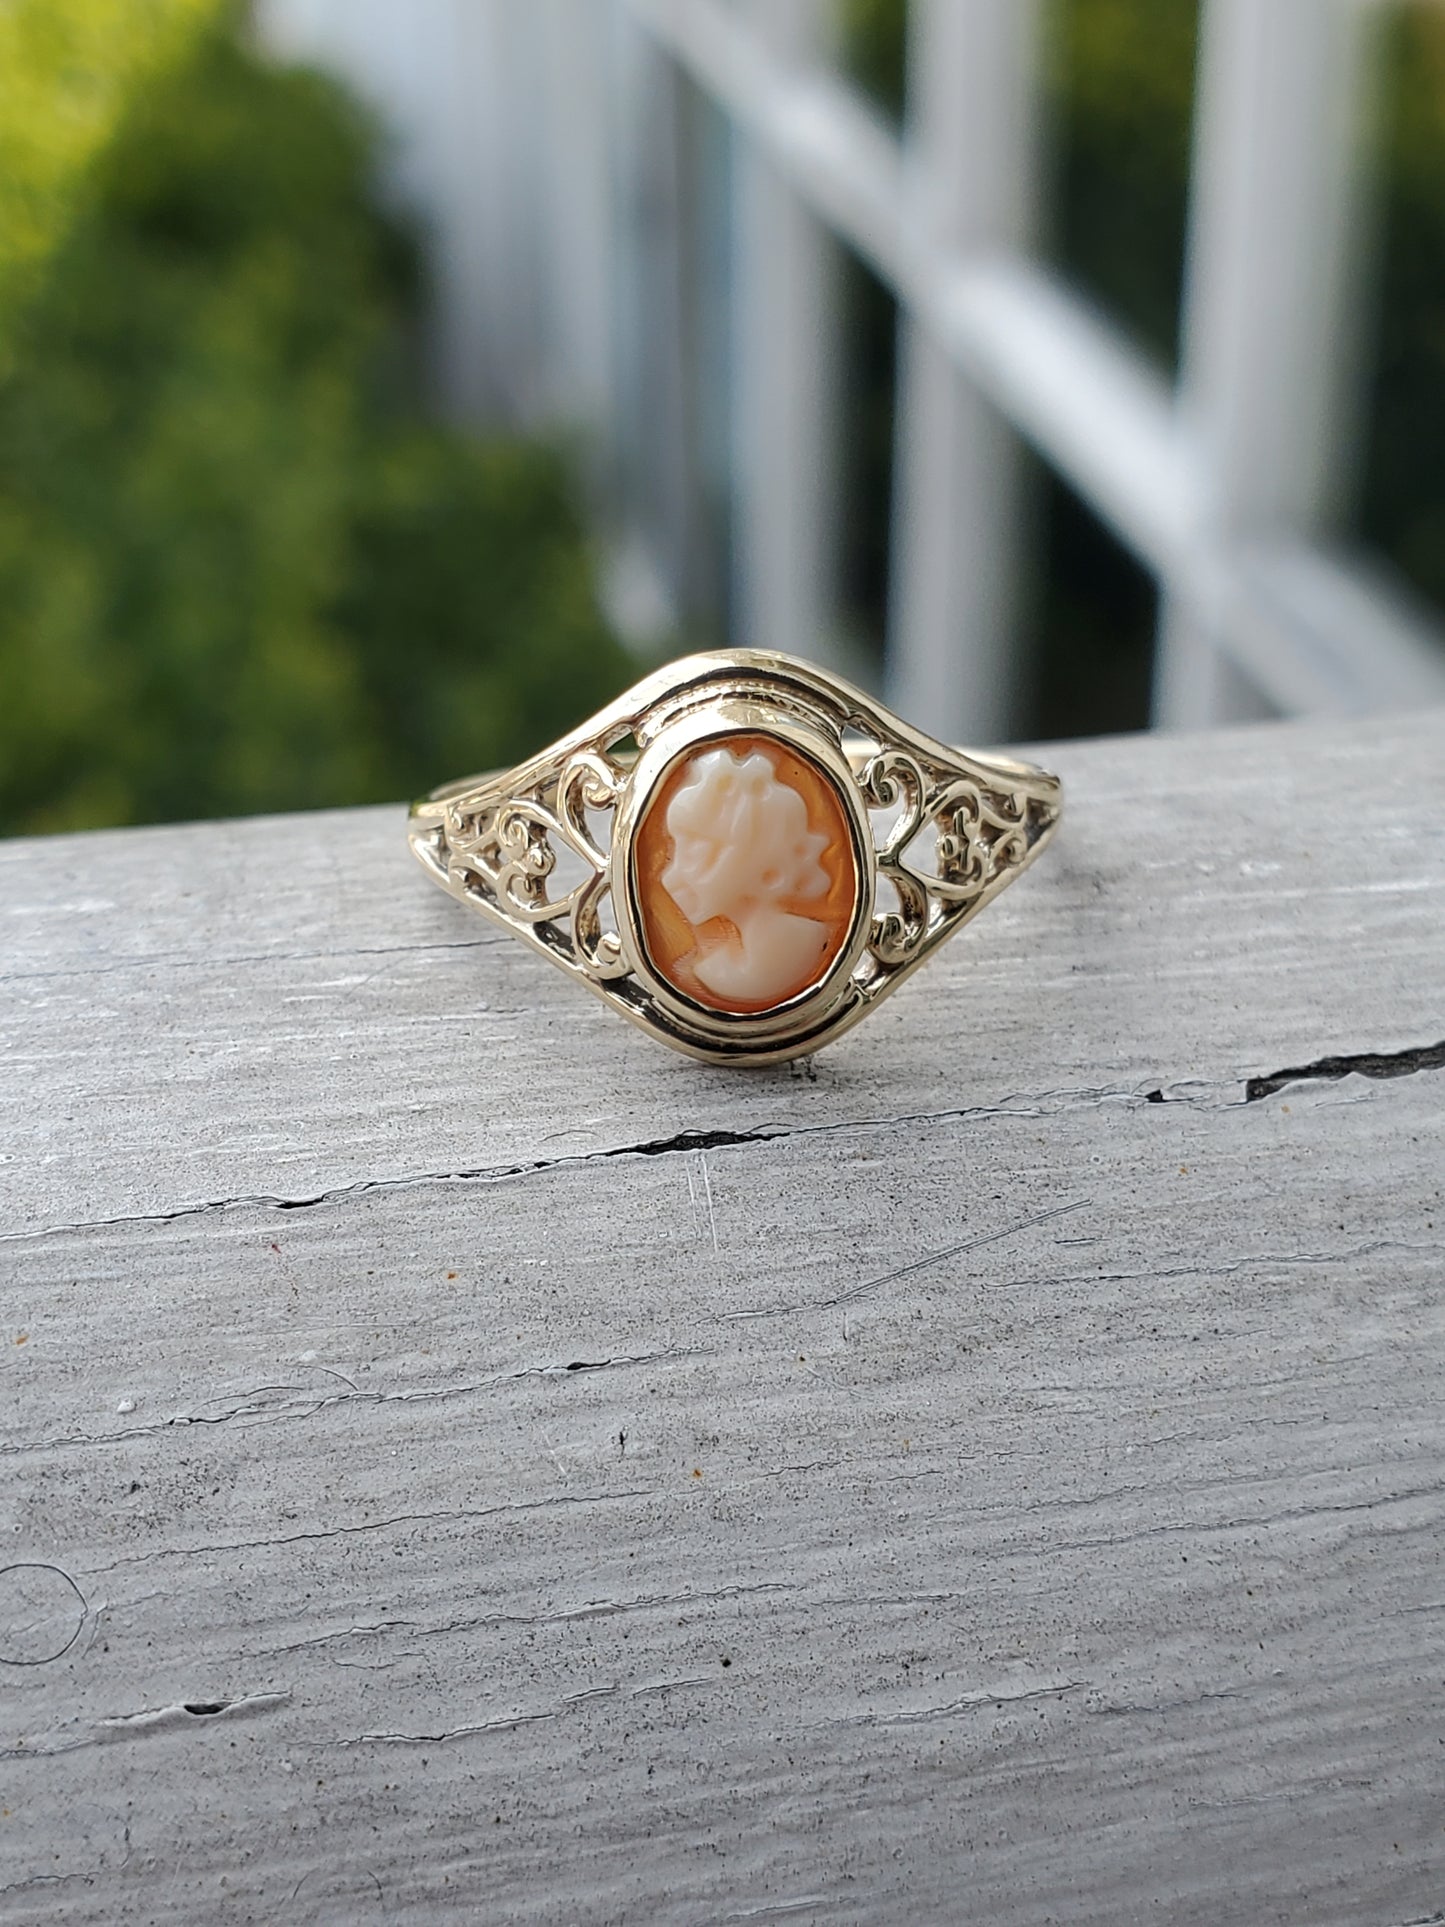 10k Yellow Gold Ladies Vintage 1950-1960 Cameo Oval Ring